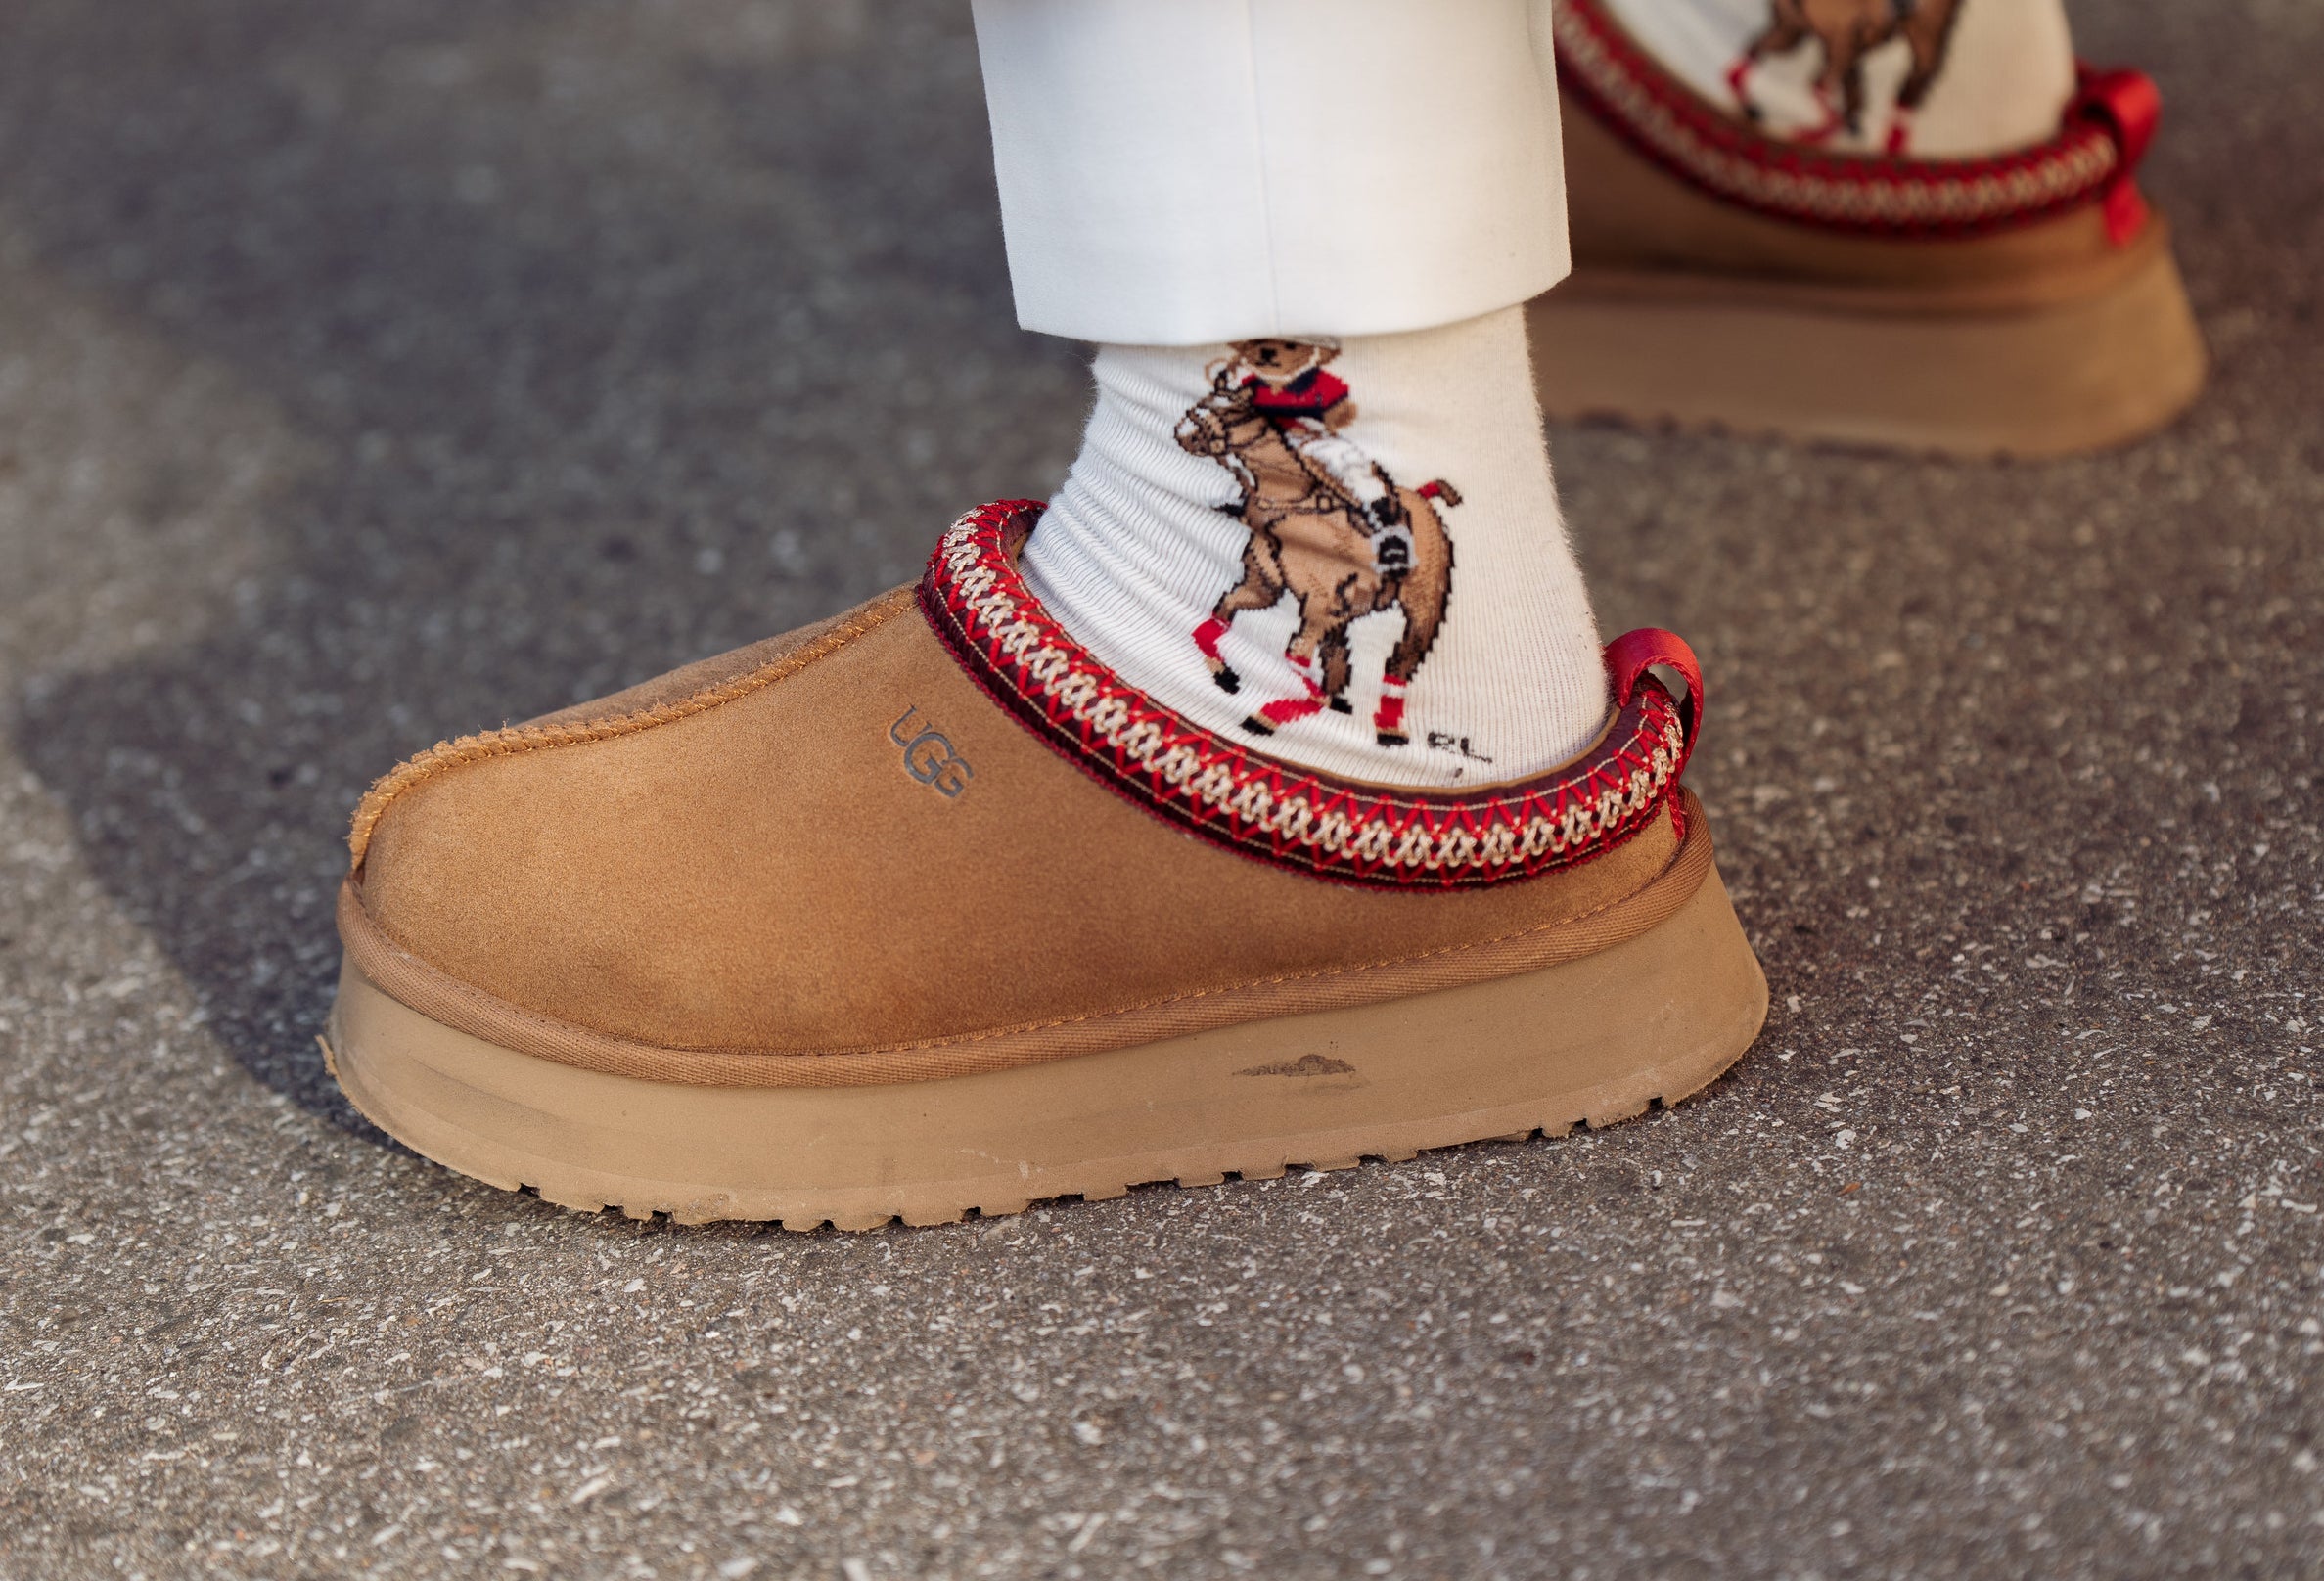 Close-up of somewhere wearing brown ugg slipper shoes with a red trim